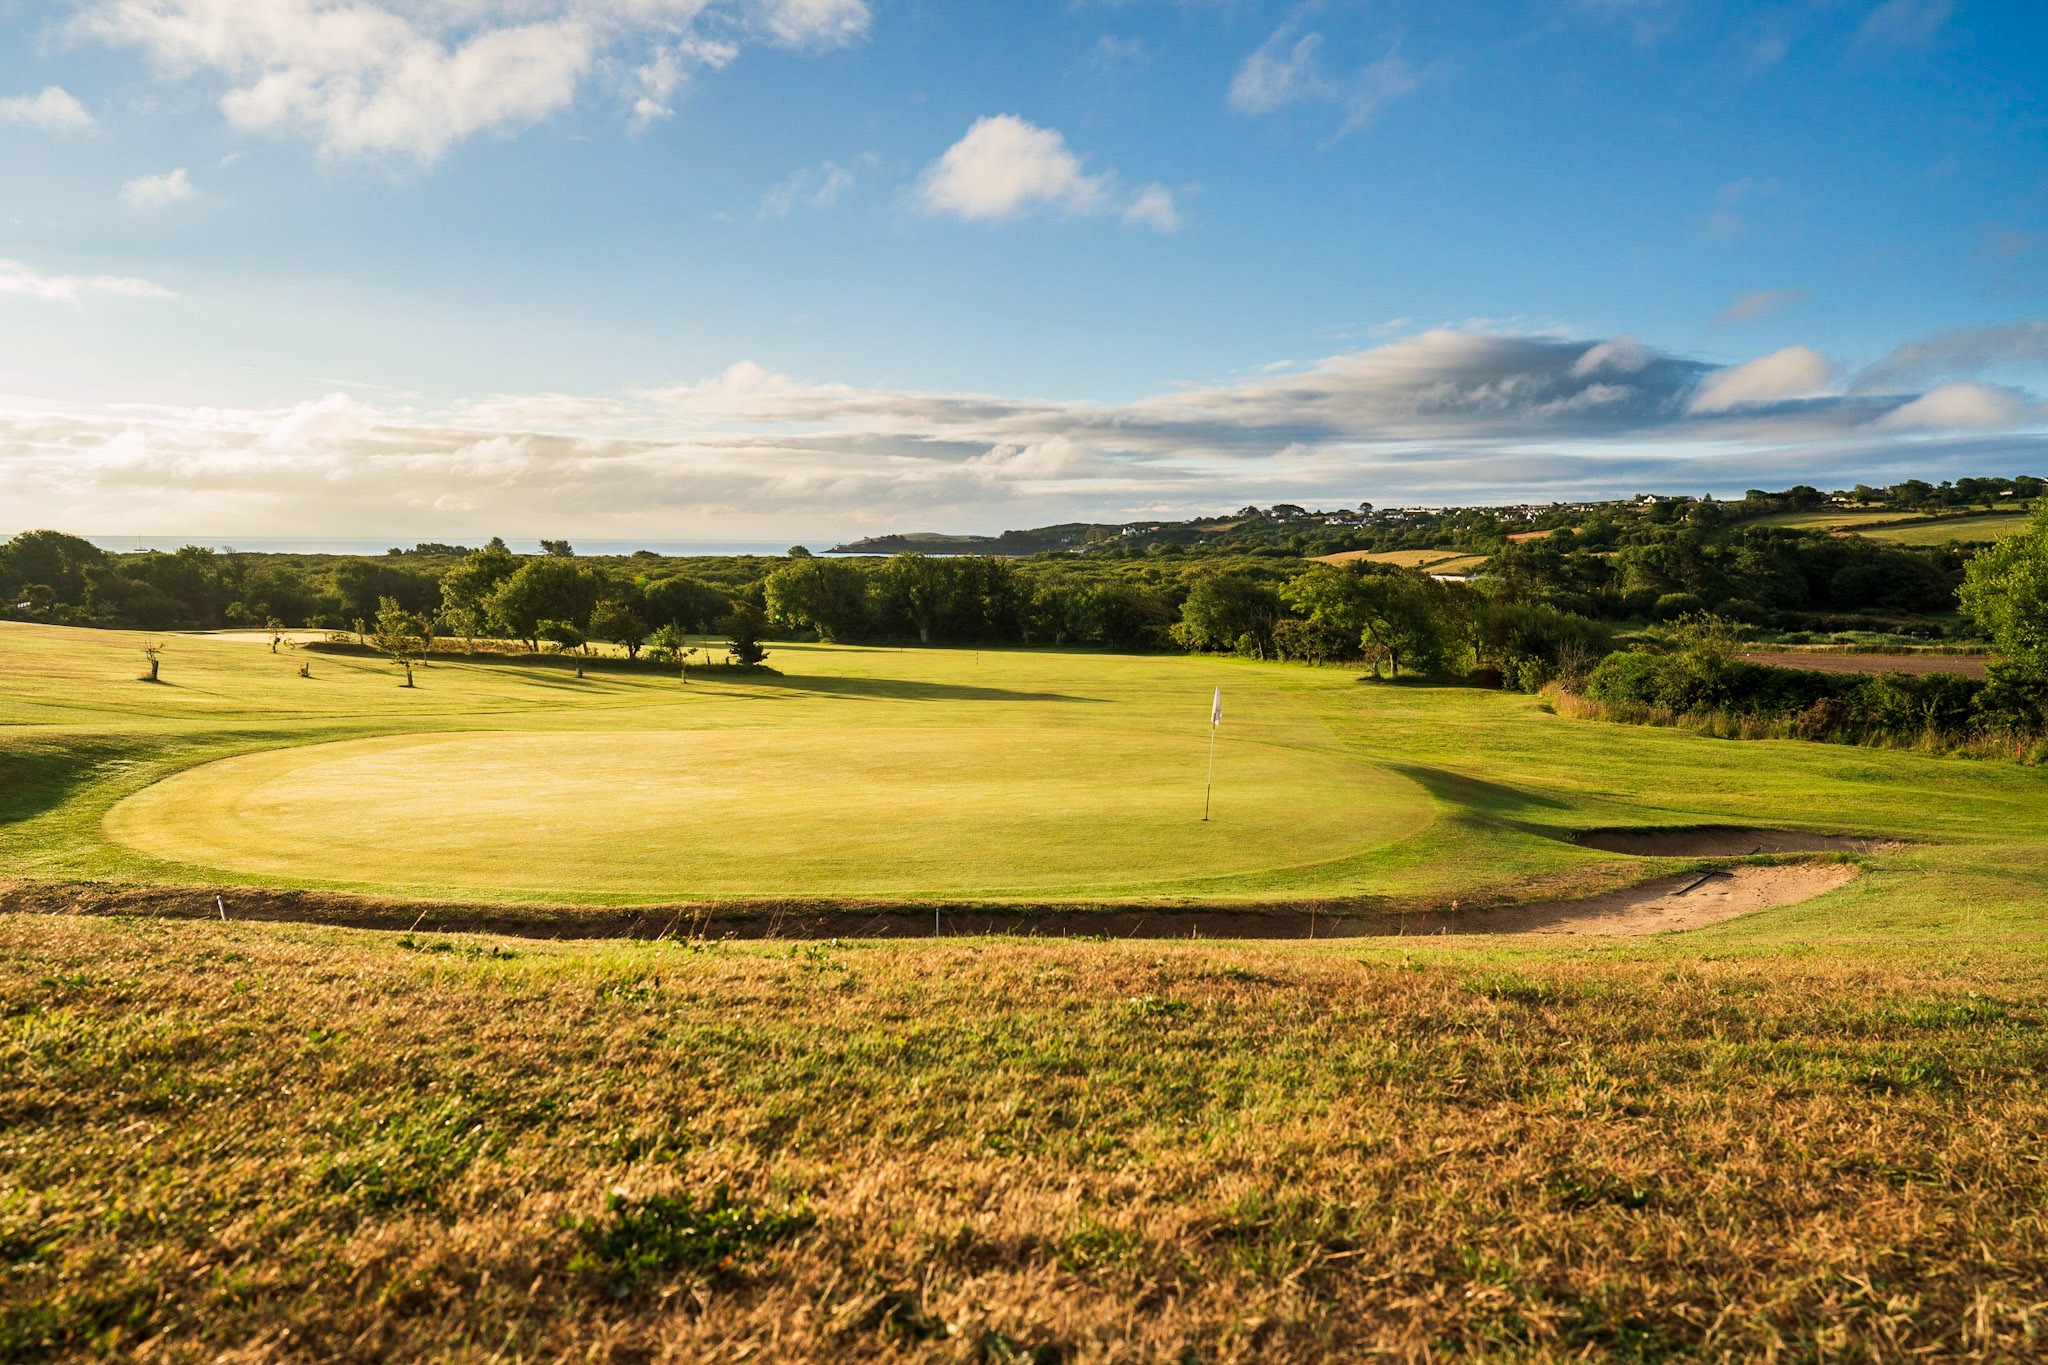 The highest part of the course, the 15th green with views back over the trees to the sea.